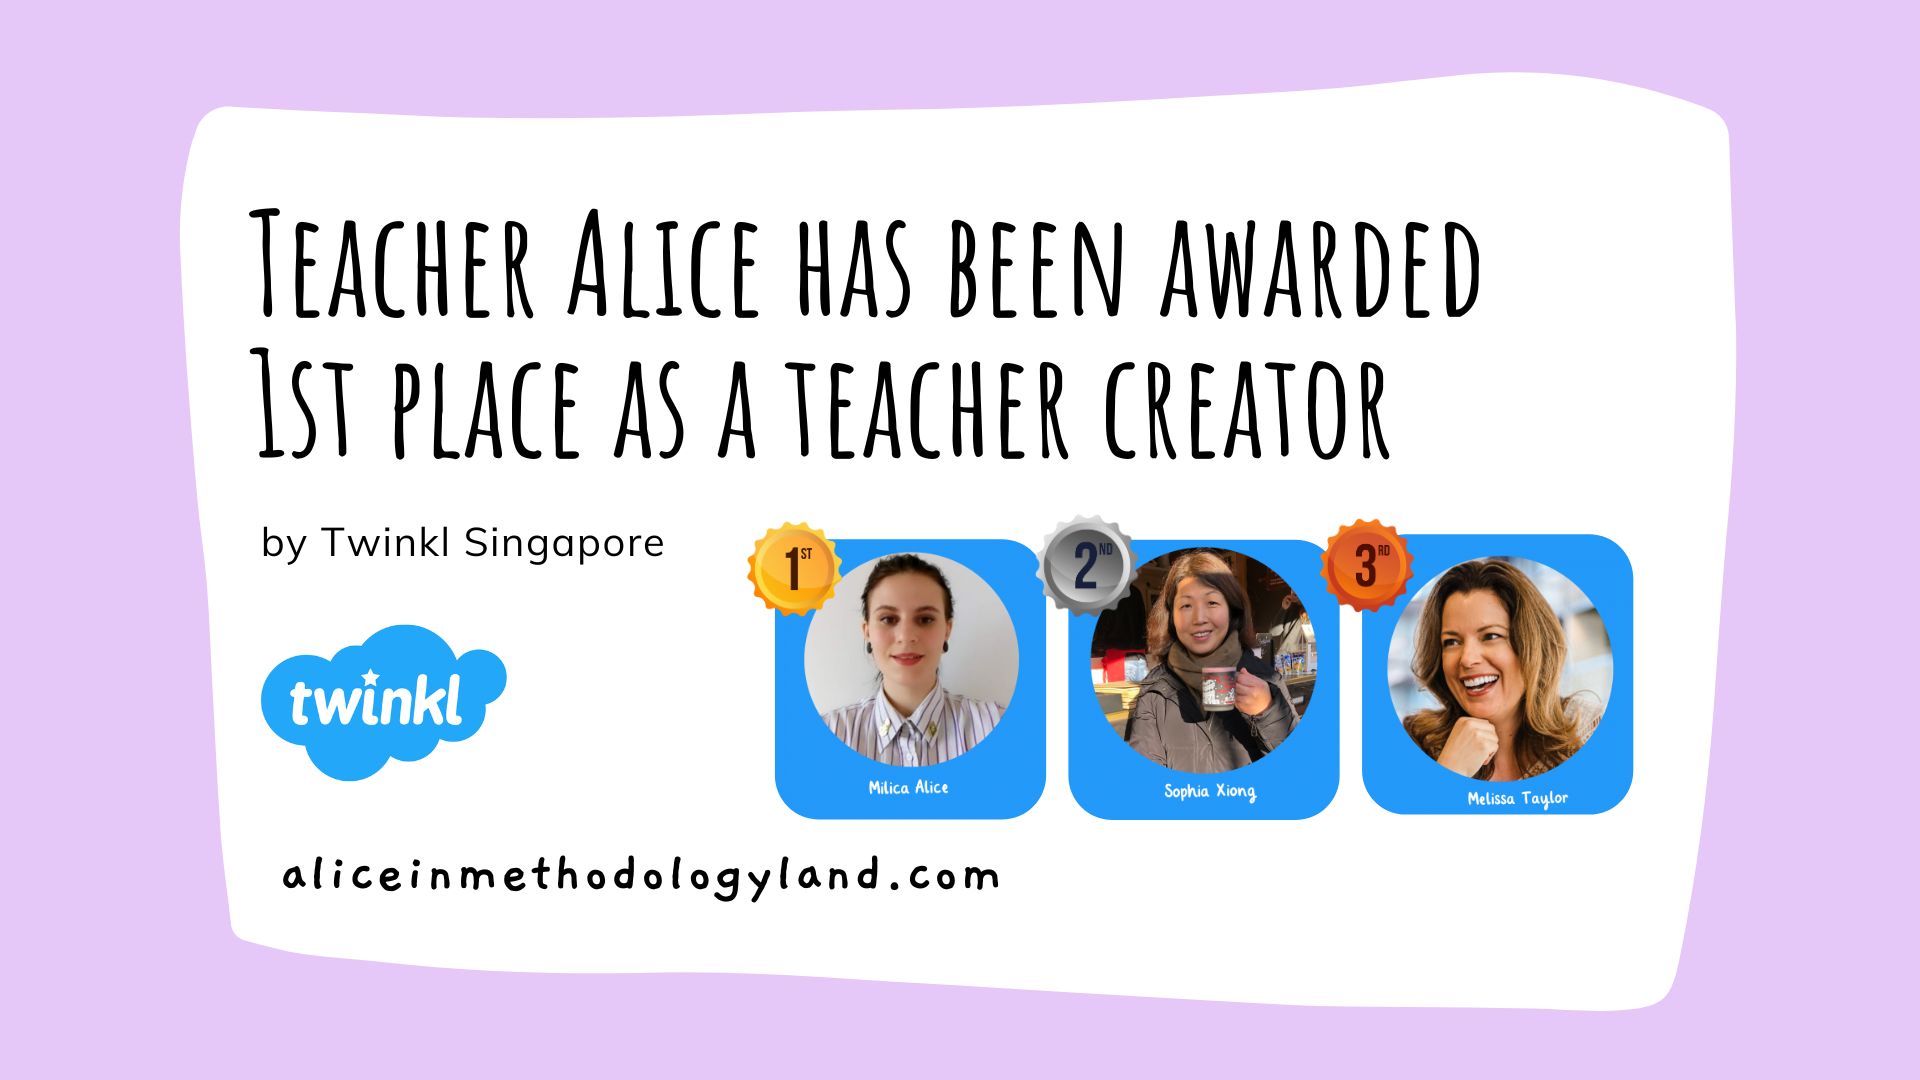 Announcement: Teacher Alice has been awarded 1st place as a teacher creator by Twinkl Singapore